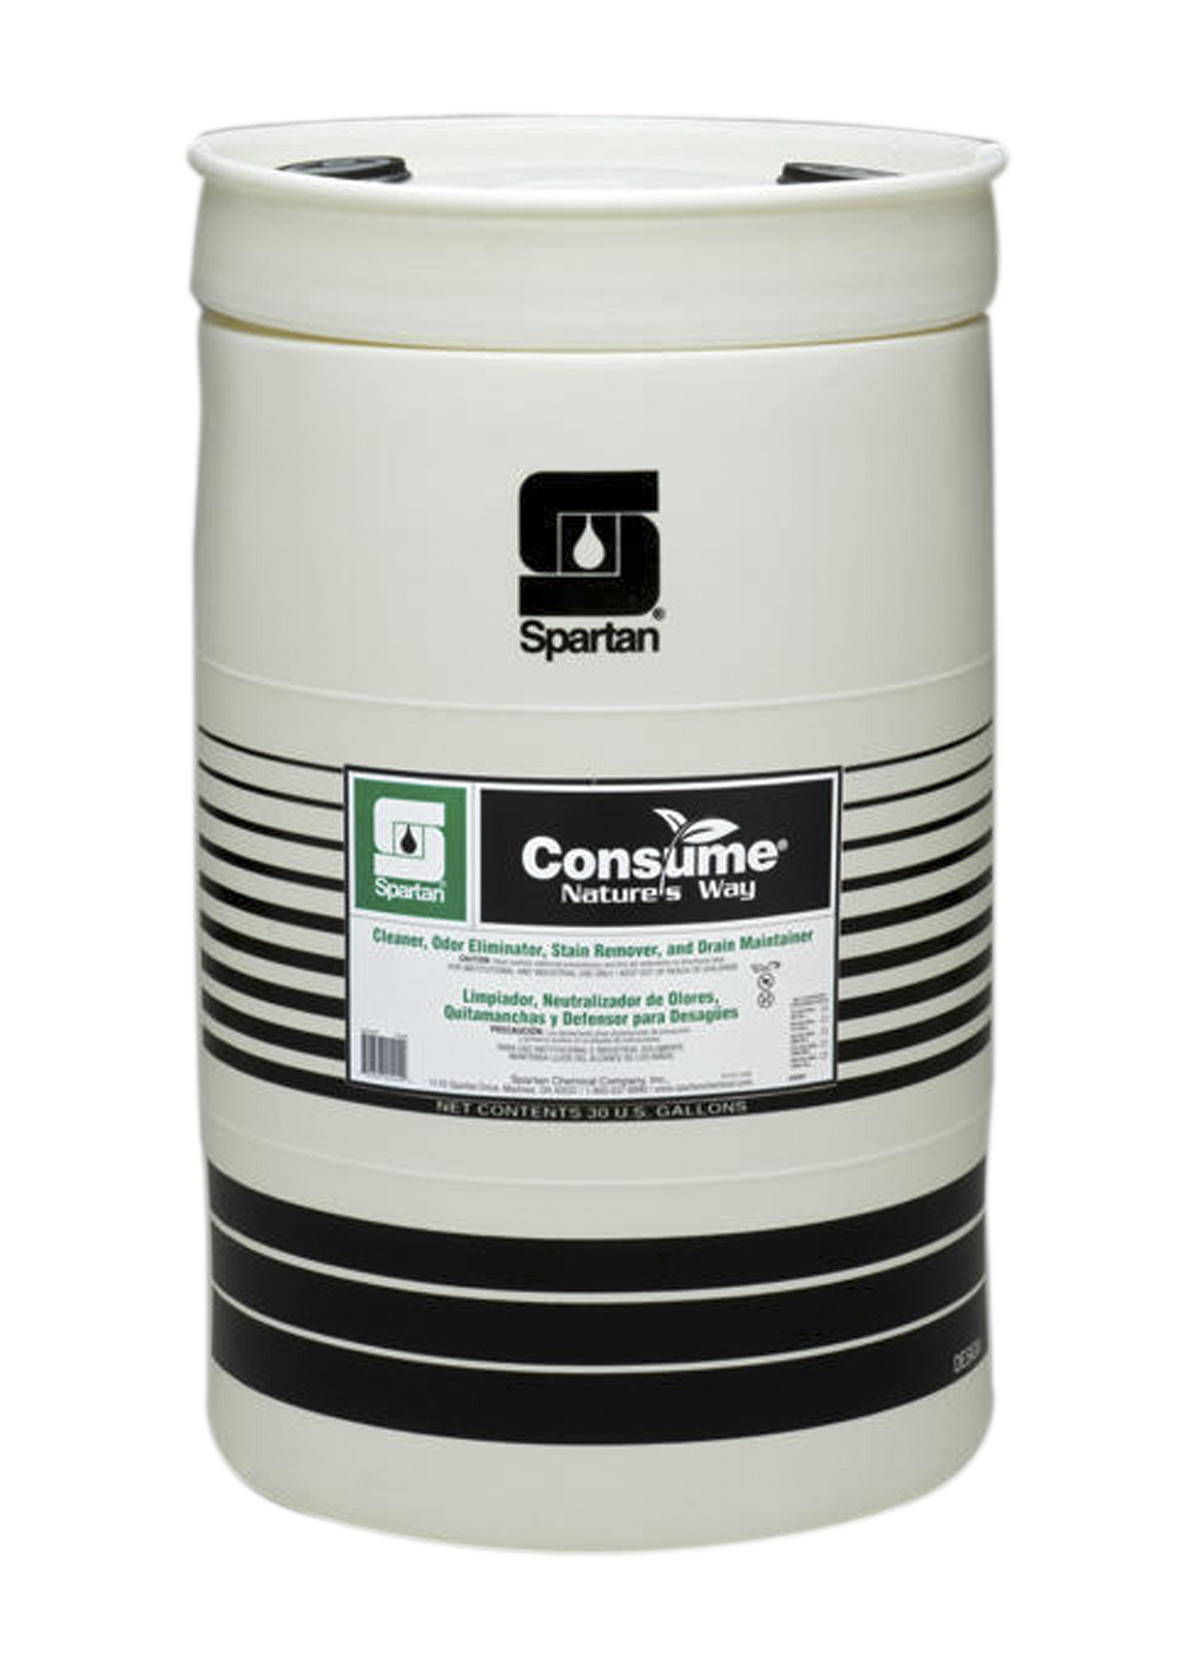 Spartan Chemical Company Consume, 30 GAL DRUM